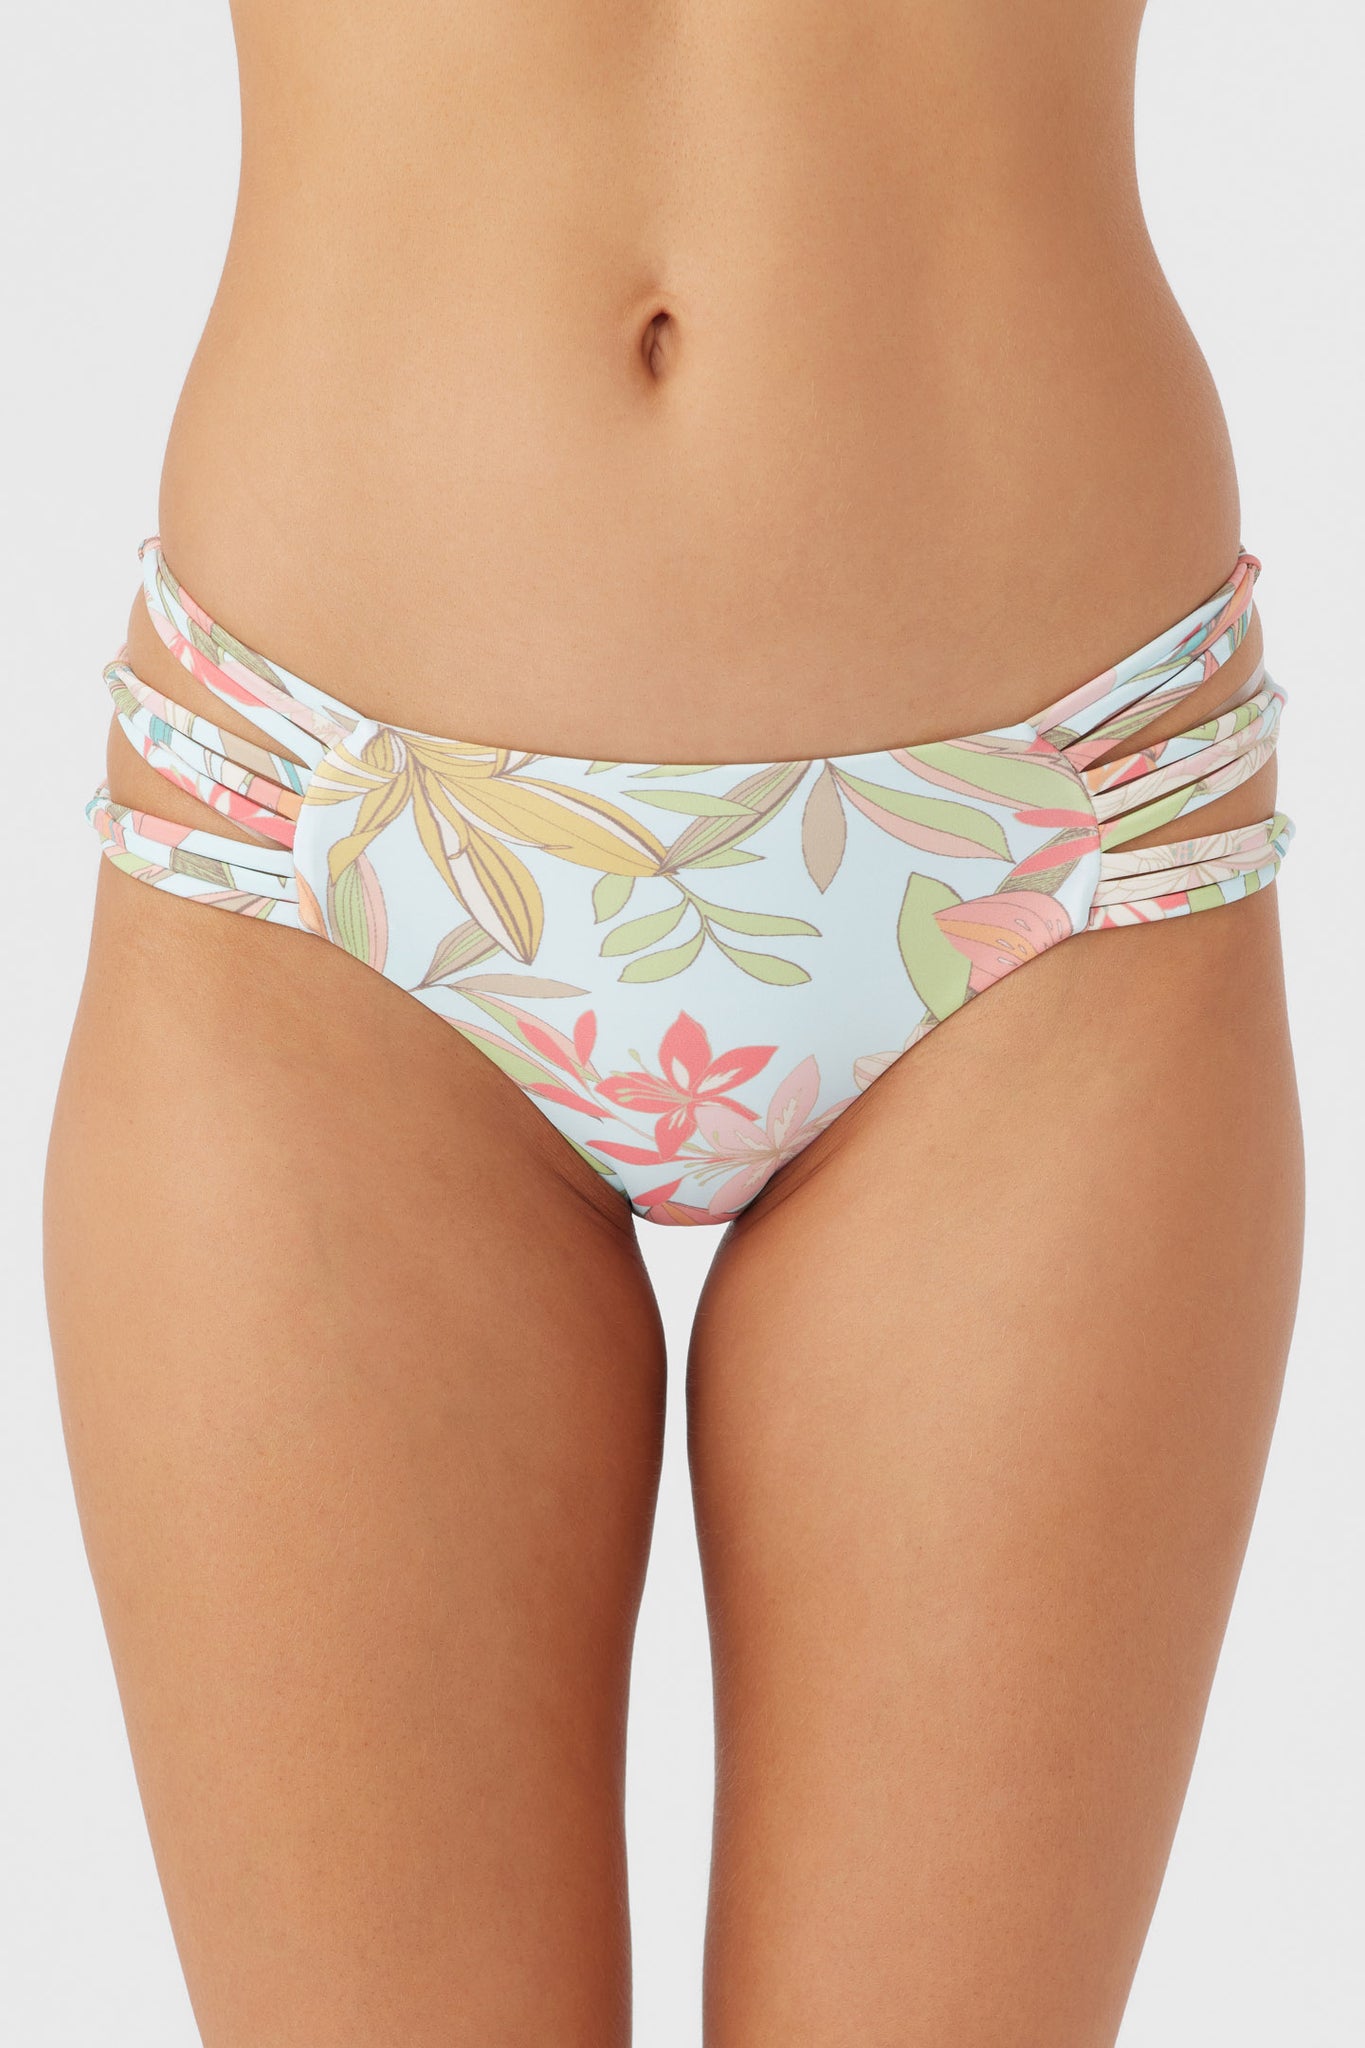 DALIA FLORAL BOULDERS MID-RISE FULL BOTTOMS